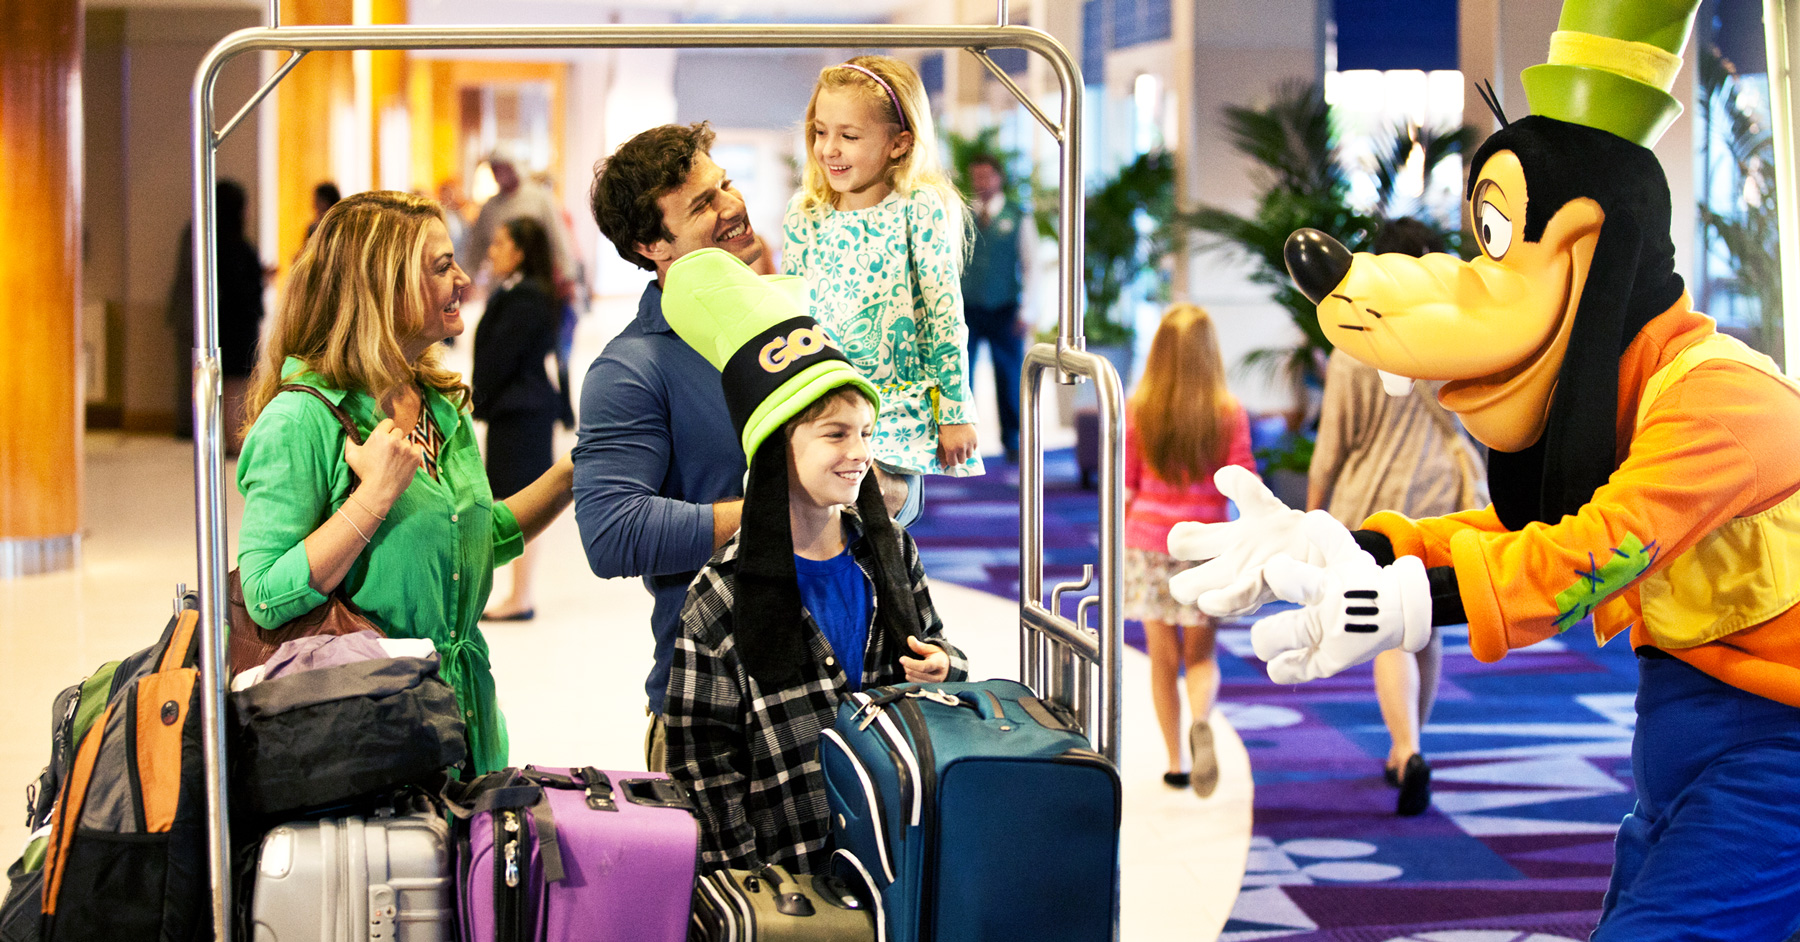 https://vipdisneytravel.com/wp-content/uploads/2020/08/Goofy-with-family-and-luggage-cart-1.jpg